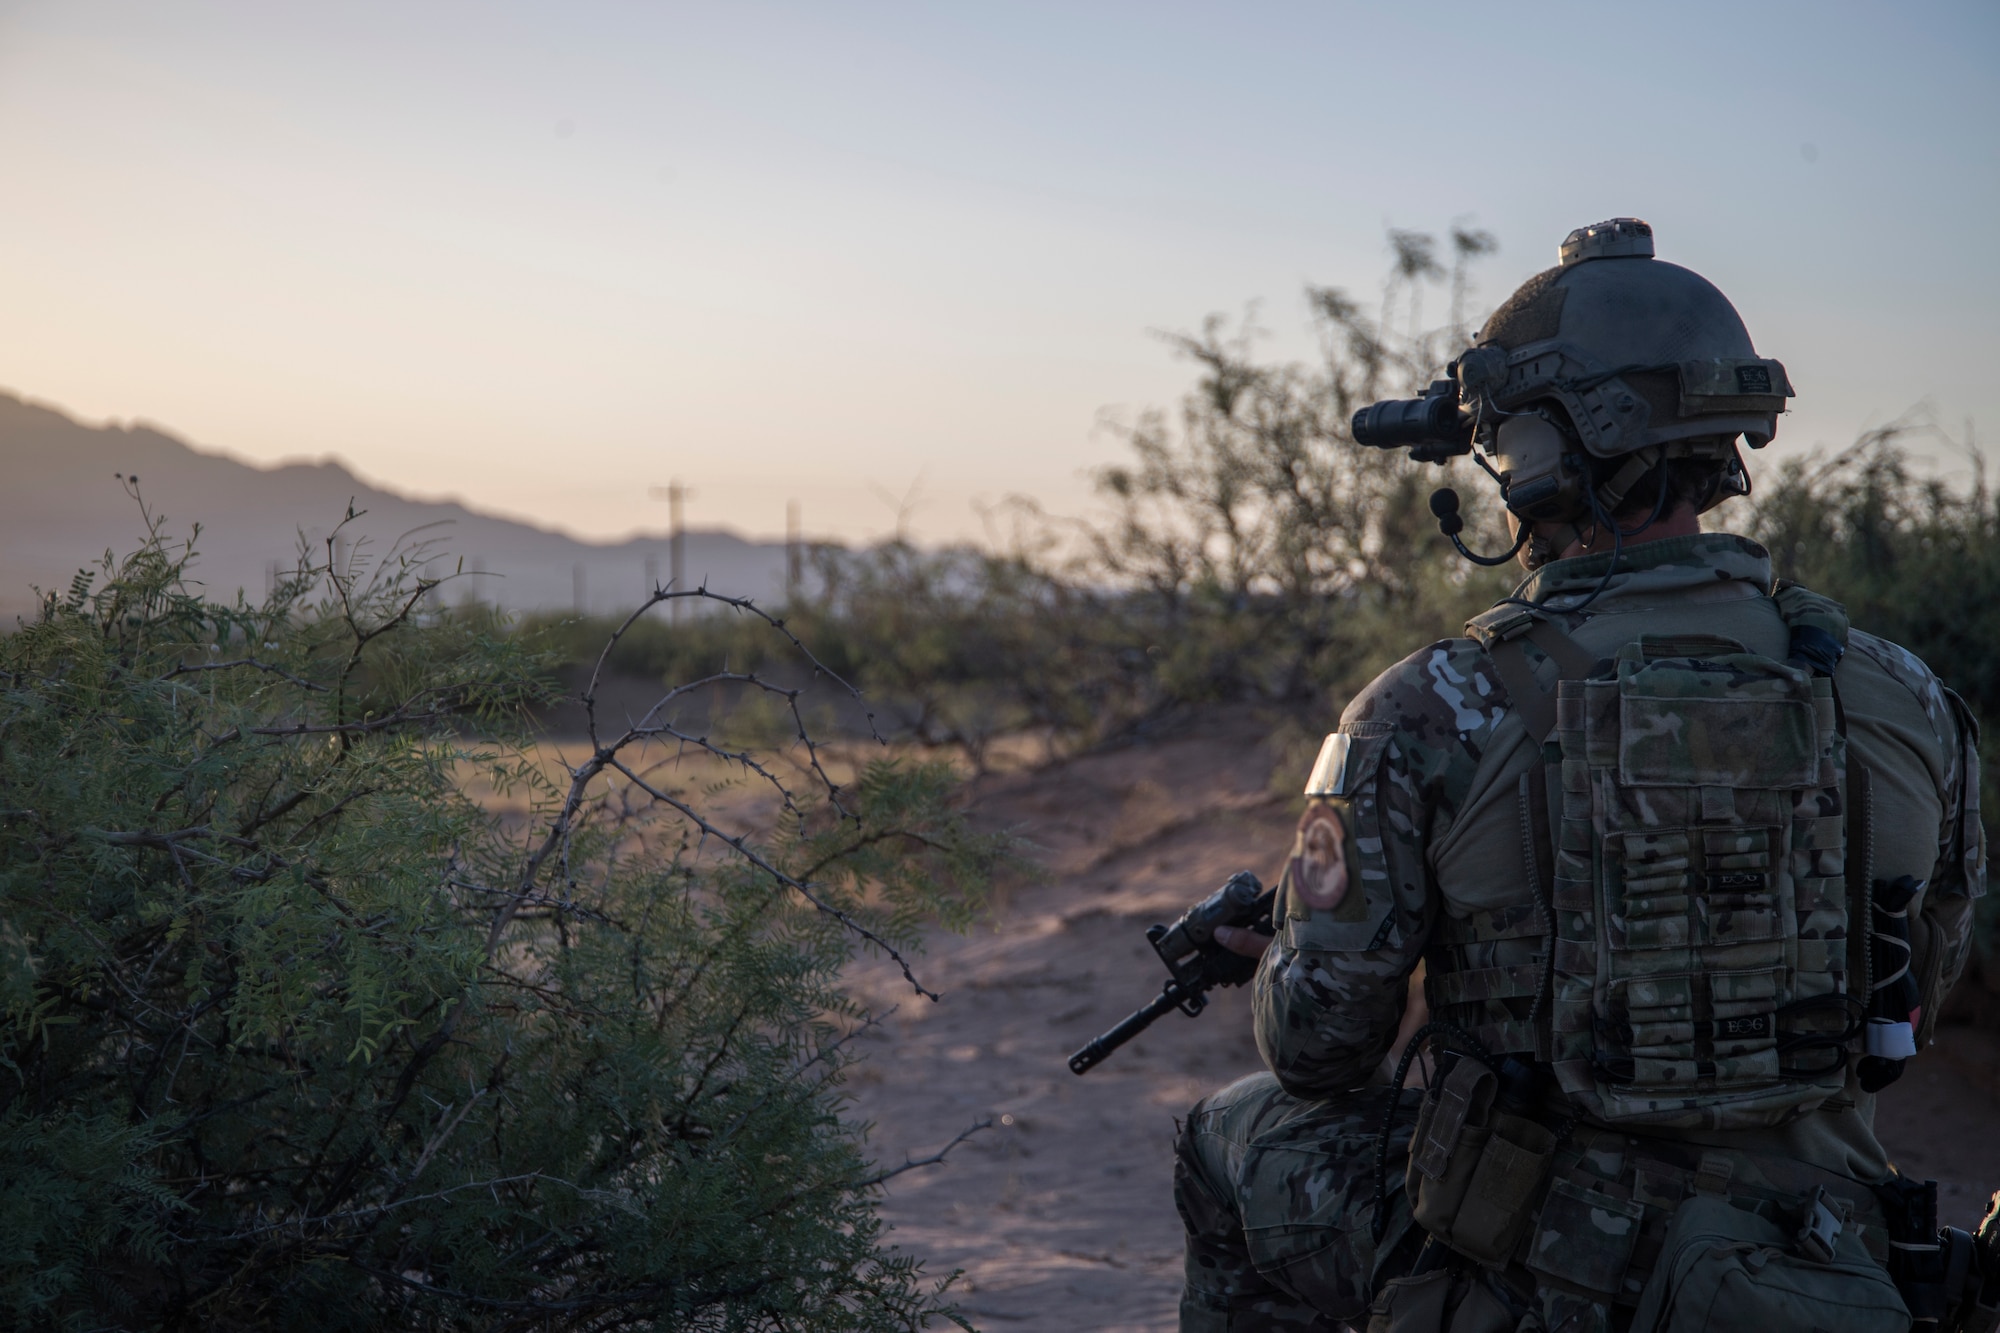 A Special Tactics Airman with the 21st Special Tactics Squadron prepares to infiltrate a compound at Fort Bliss, Texas, June 24, 2018.